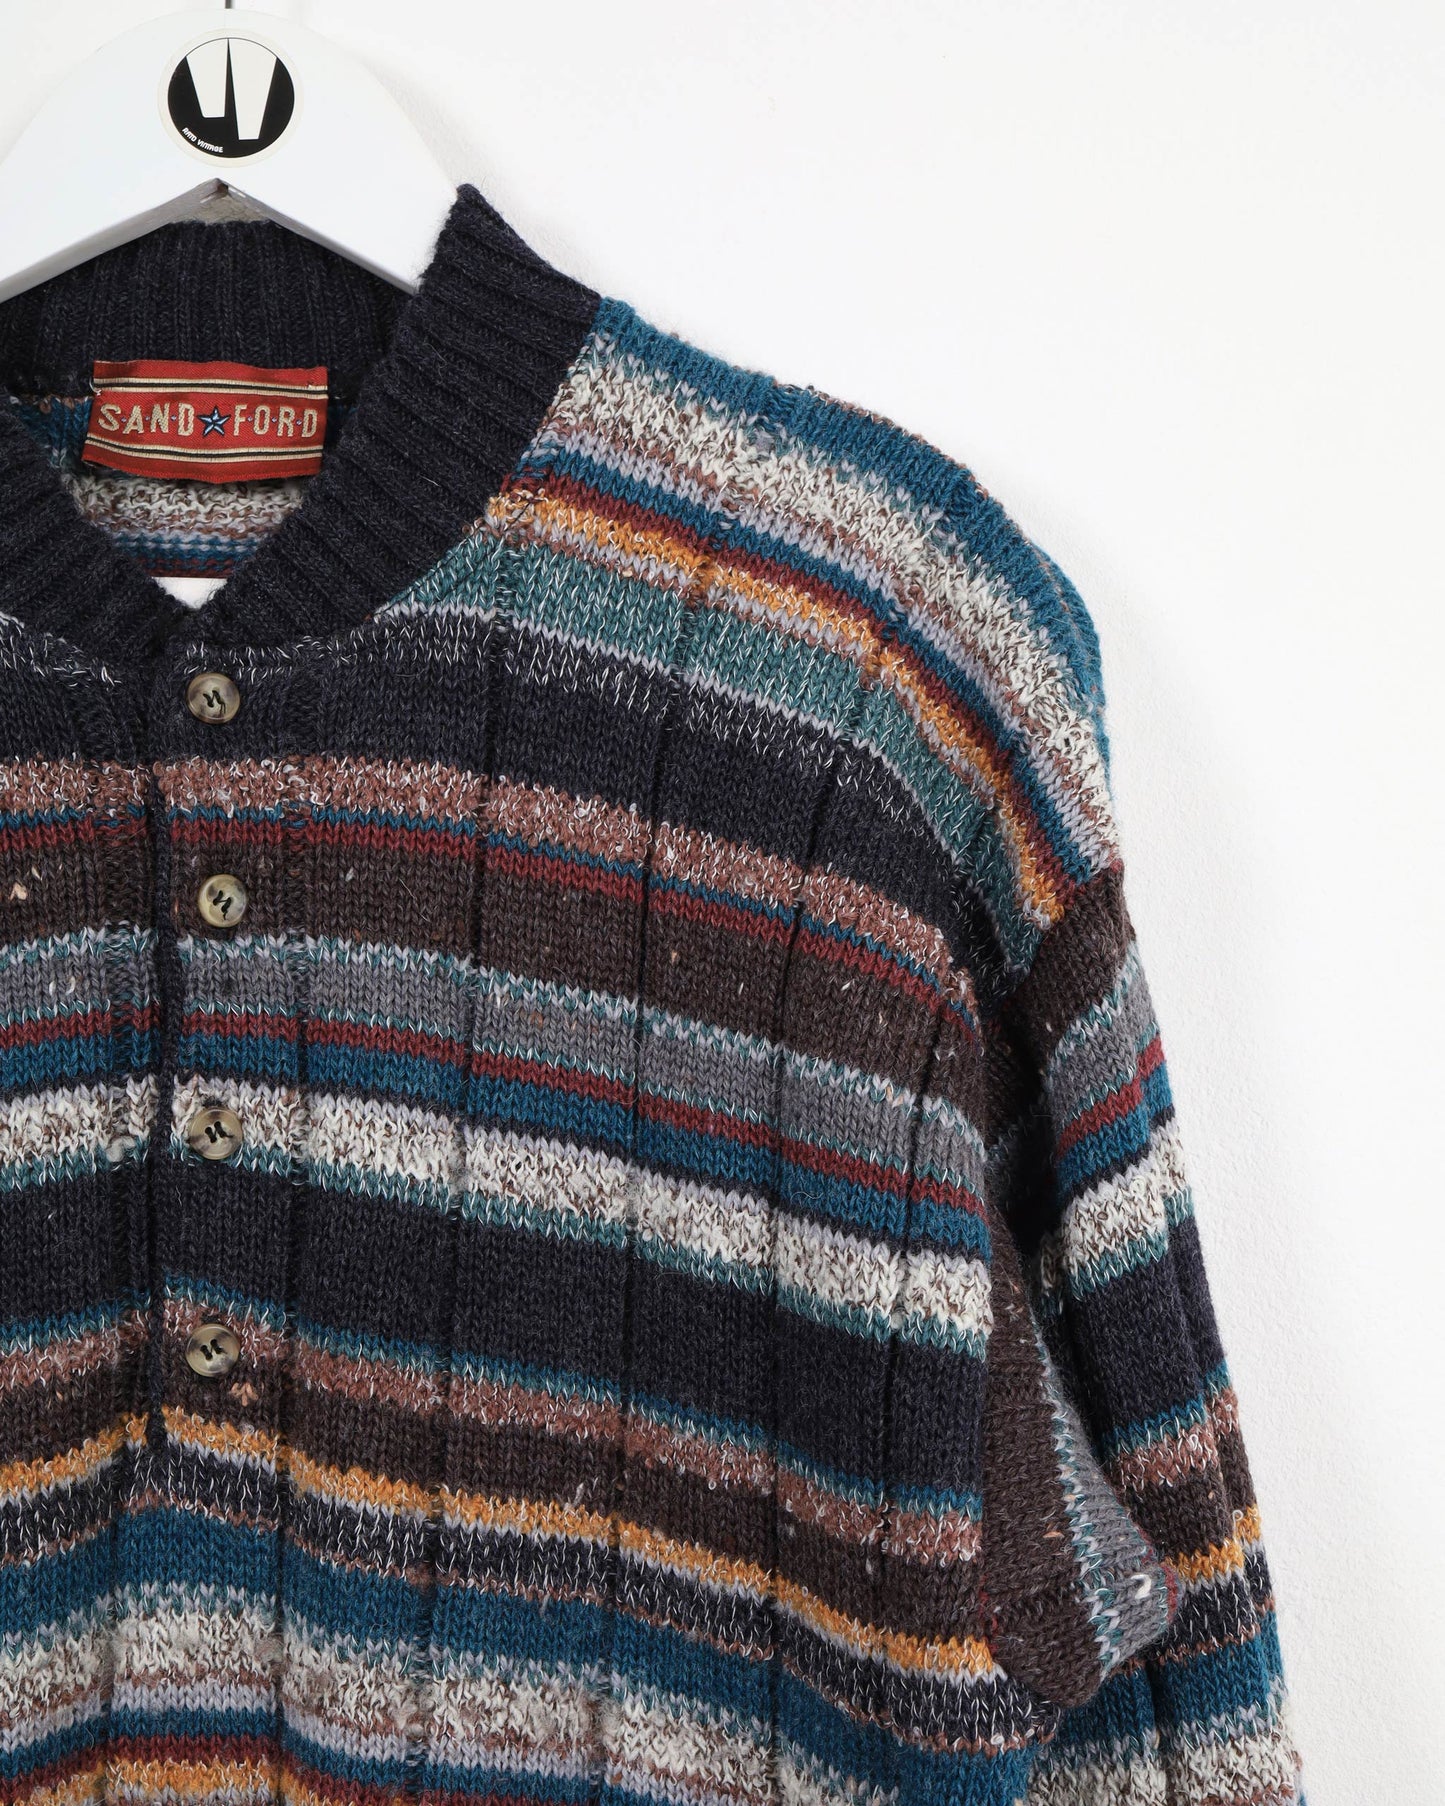 Vintage Sand Ford ¼ Neck Button Up Striped Knit Wool Jumper